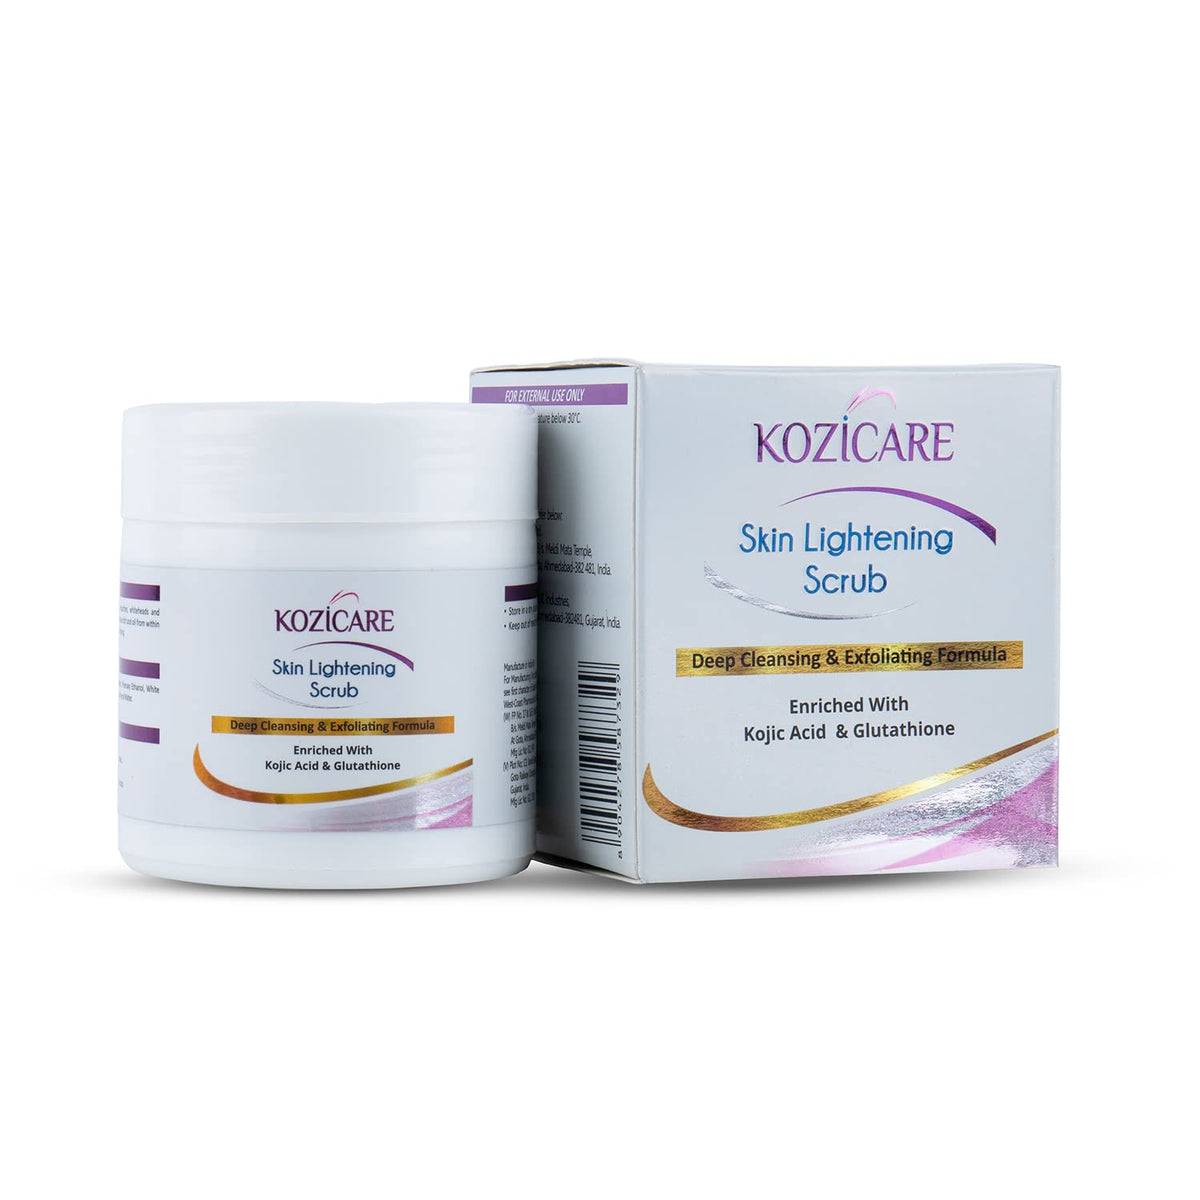 Kozicare Skin Lightening Scrub for Deep Cleansing & Exfoliating Formula | Enriched with 2% Kojic acid, 1% Glutathione| Helps in Cleaning Impurities, Hydrates skin, enhances glow, Cleanses Dirt, Impurities, Blackheads - 100 GM